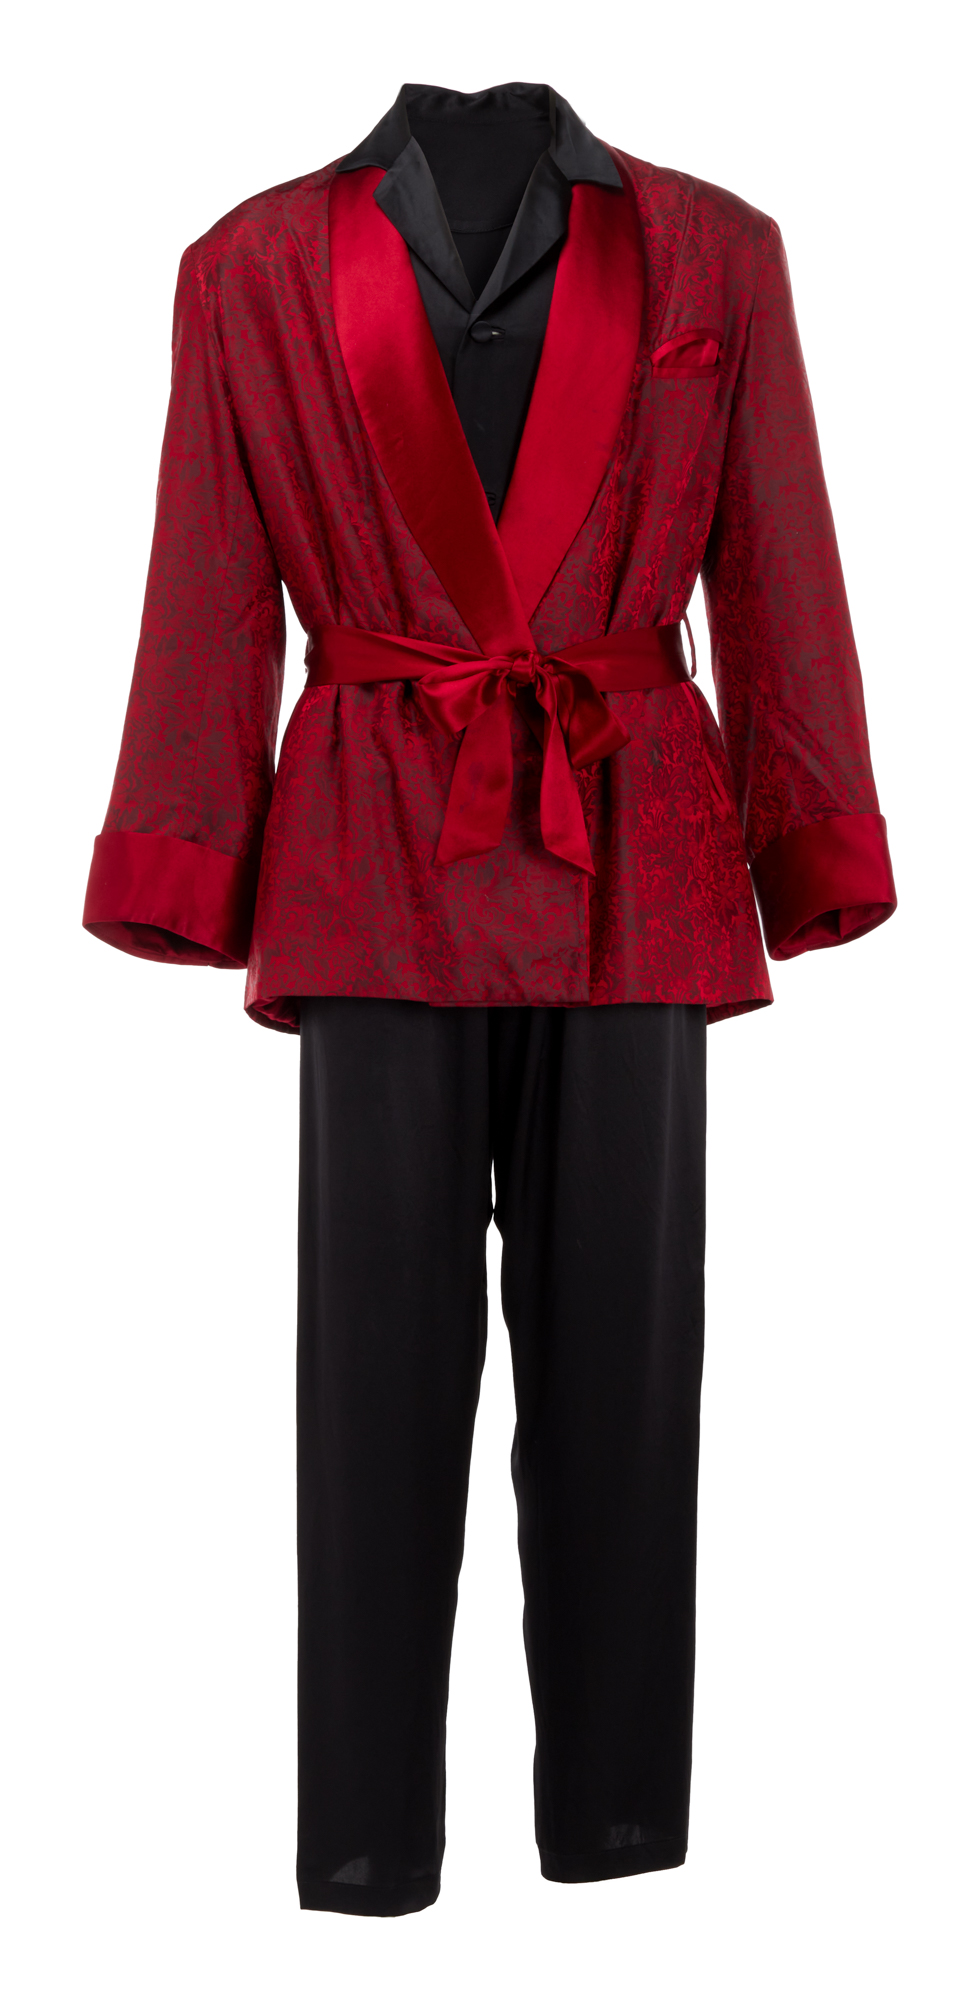 The set of Hugh Hefner’s classic smoking jacket, silk pajamas, slippers, and tobacco pipe will be going under the hammer